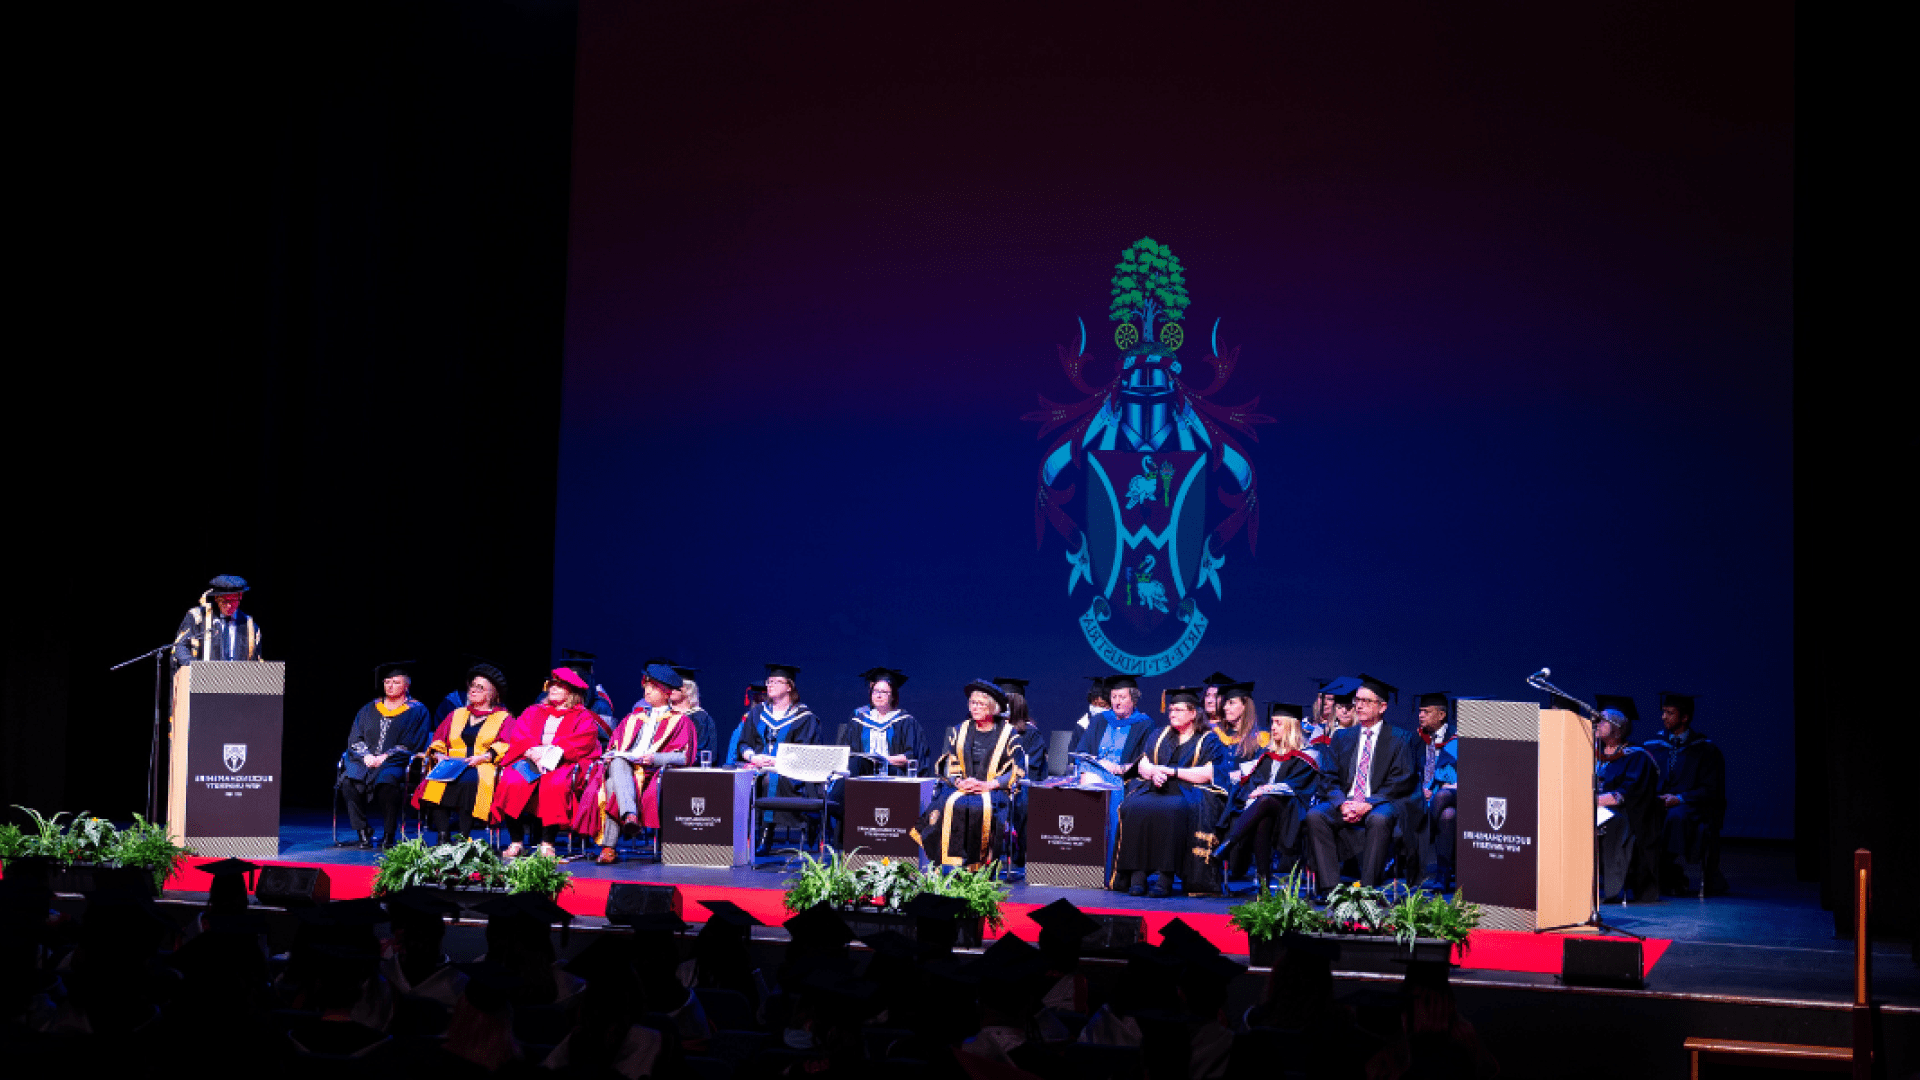 Graduation guests sat in the awards ceremony whilst the Vice-Chancellor gives a speech